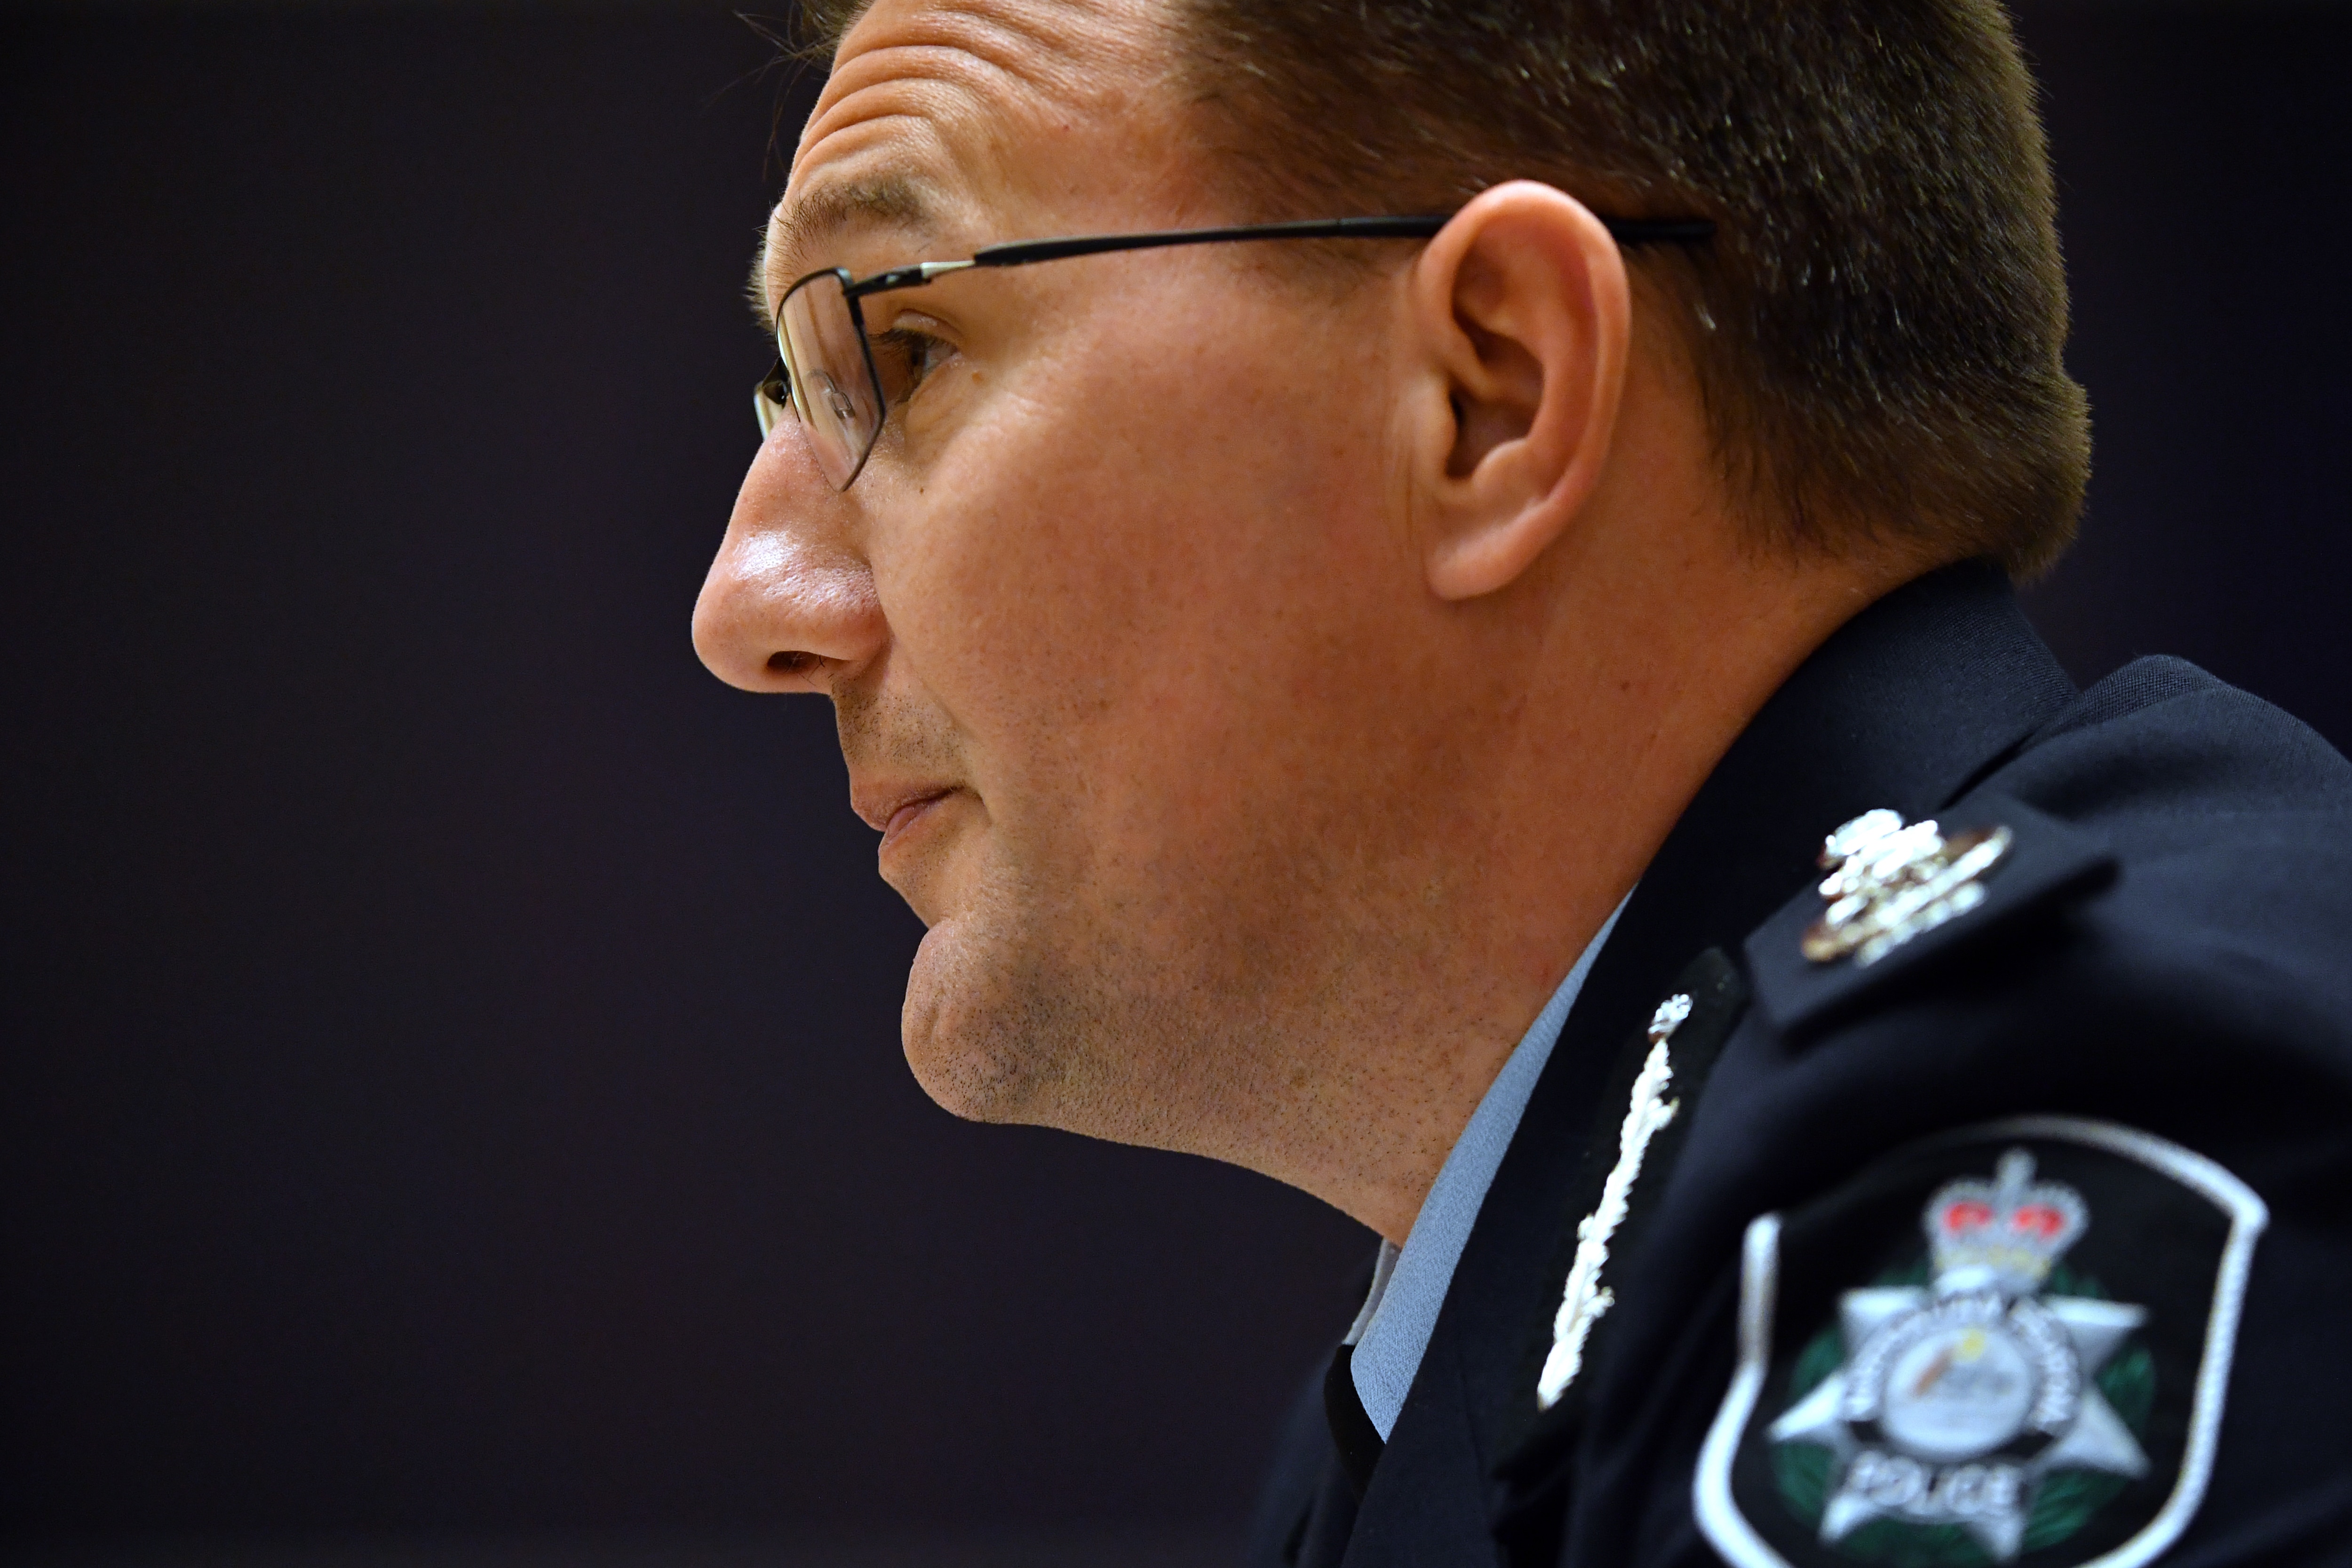 Australian Federal Police AFP Commissioner Reece Kershaw appears before a Senate hearing into press freedom.